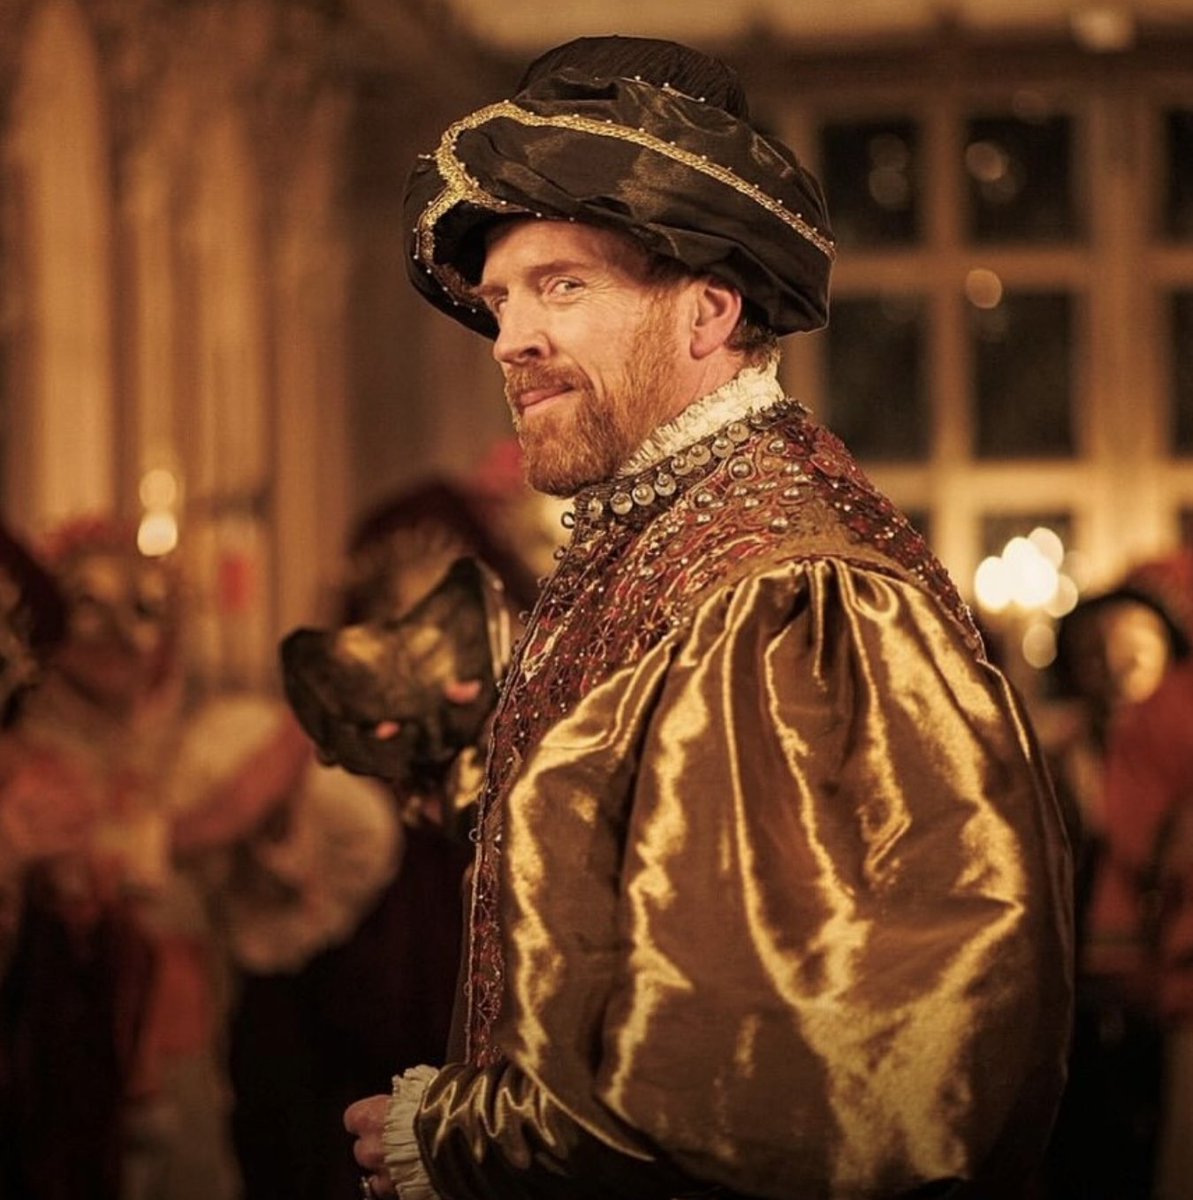 HELLO, HENRY! Here's the first look photo of #DamianLewis as #HenryVIII in #HilaryMantel's #TheMirrorAndTheLight coming to BBC and PBS Masterpiece soon. See more first look photos here: damian-lewis.com/2024/04/03/534…